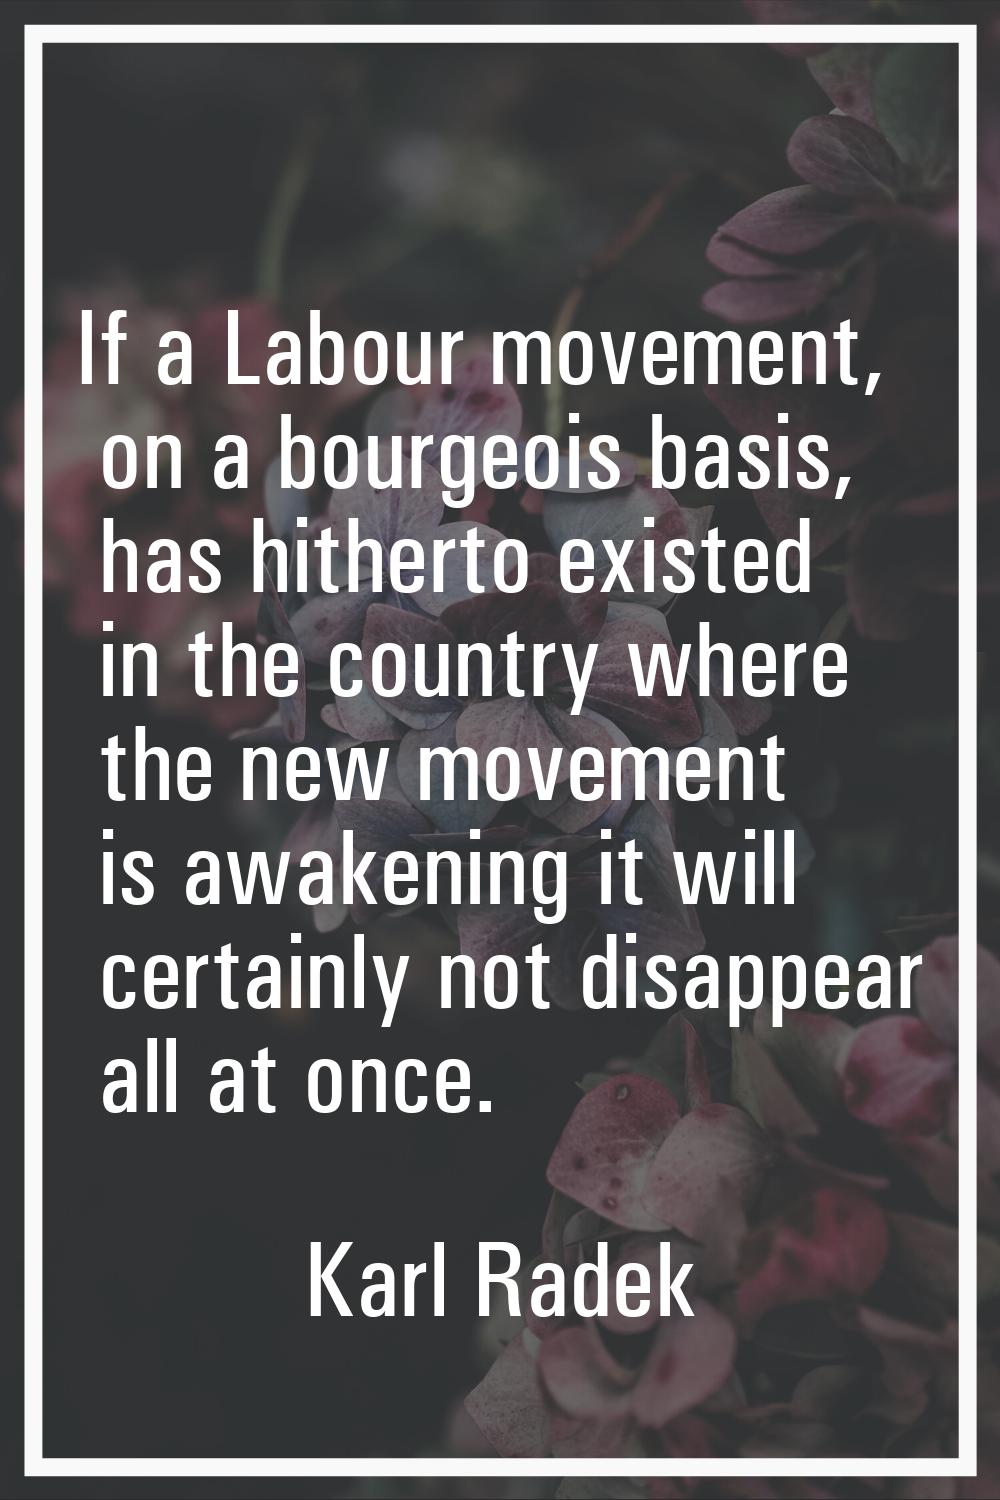 If a Labour movement, on a bourgeois basis, has hitherto existed in the country where the new movem